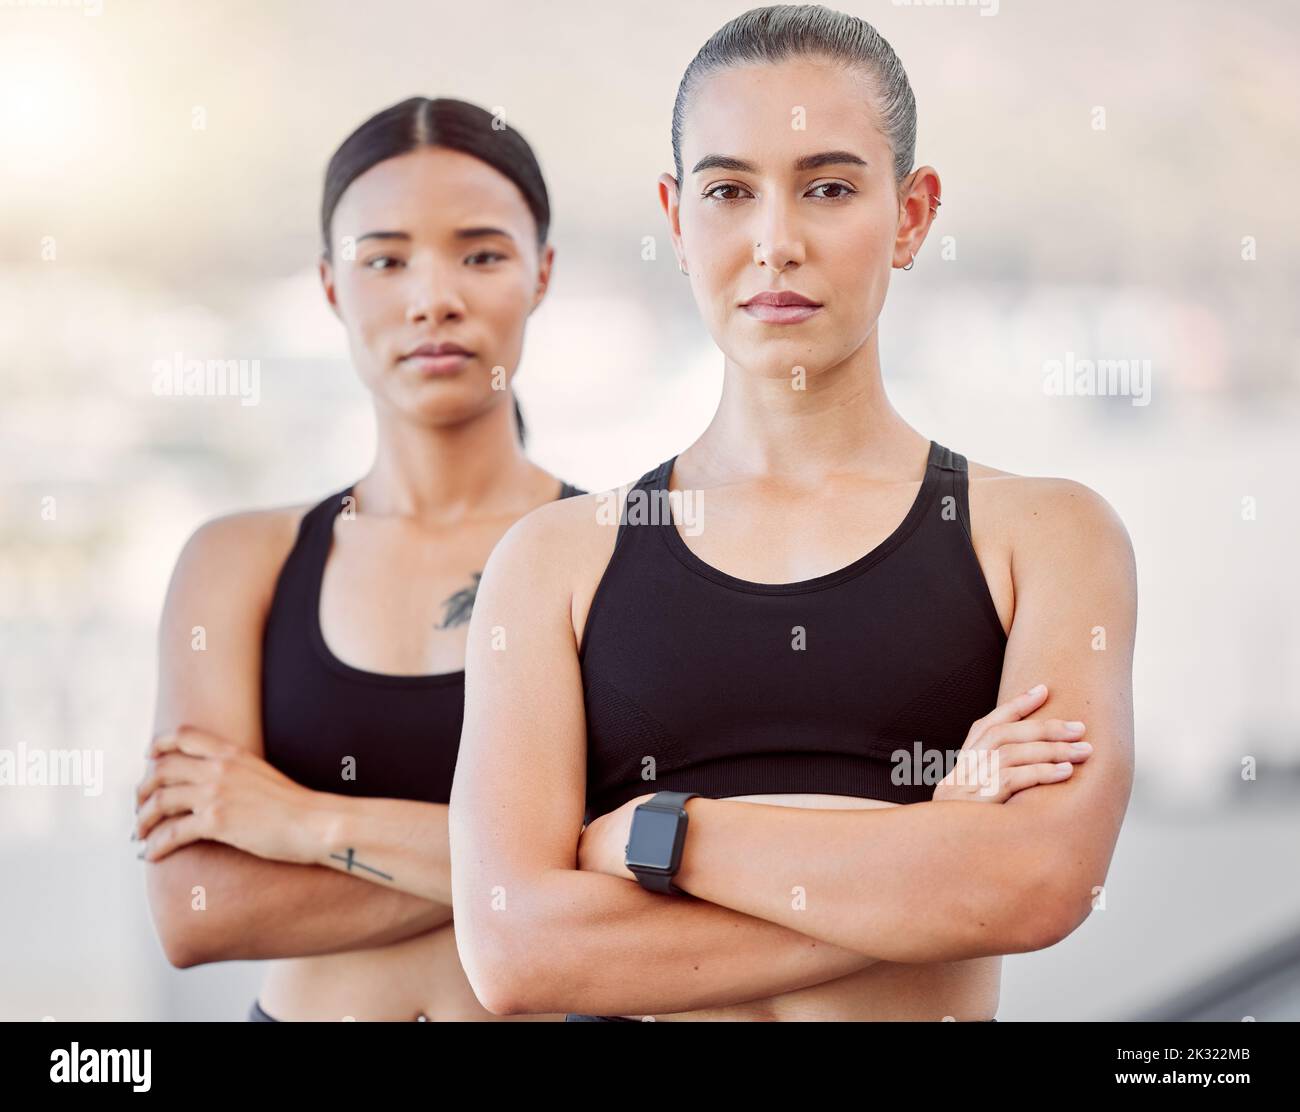 Fitness women, workout friends and exercise during athlete training, running and health goals while looking serious and ready outside. Portrait of Stock Photo